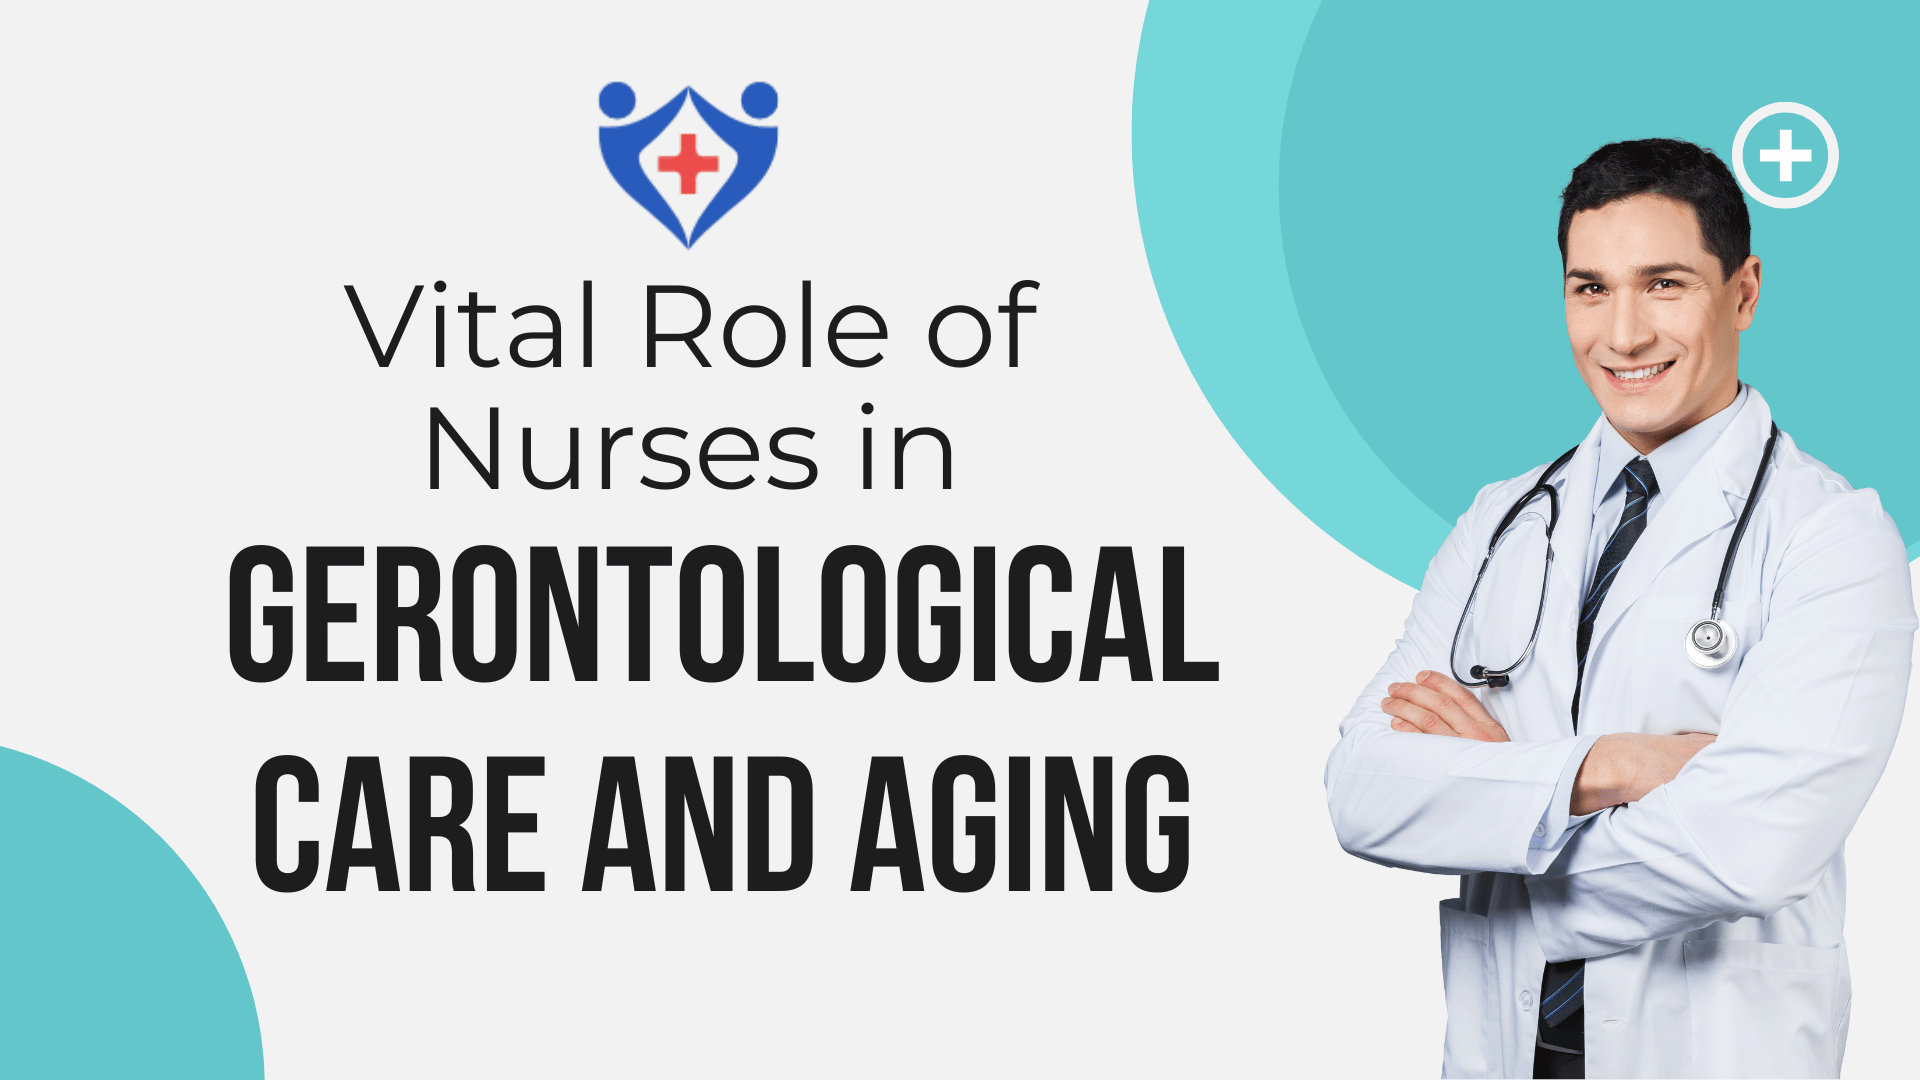 Vital Role of Nurses in Gerontological Care and Aging